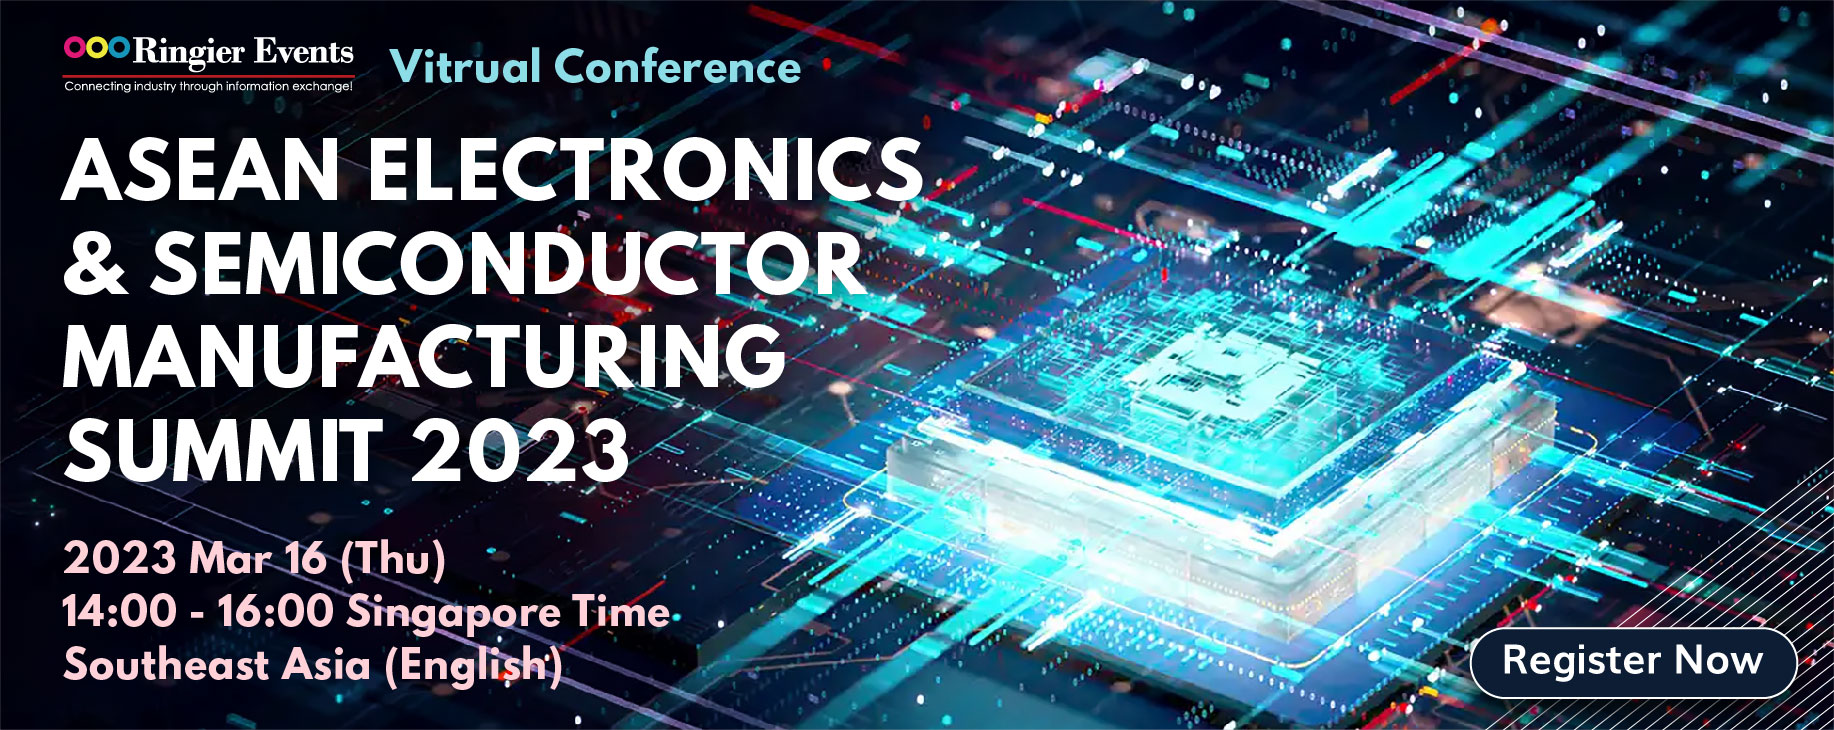 ASEAN Electronics and Semiconductor Manufacturing Summit 2023